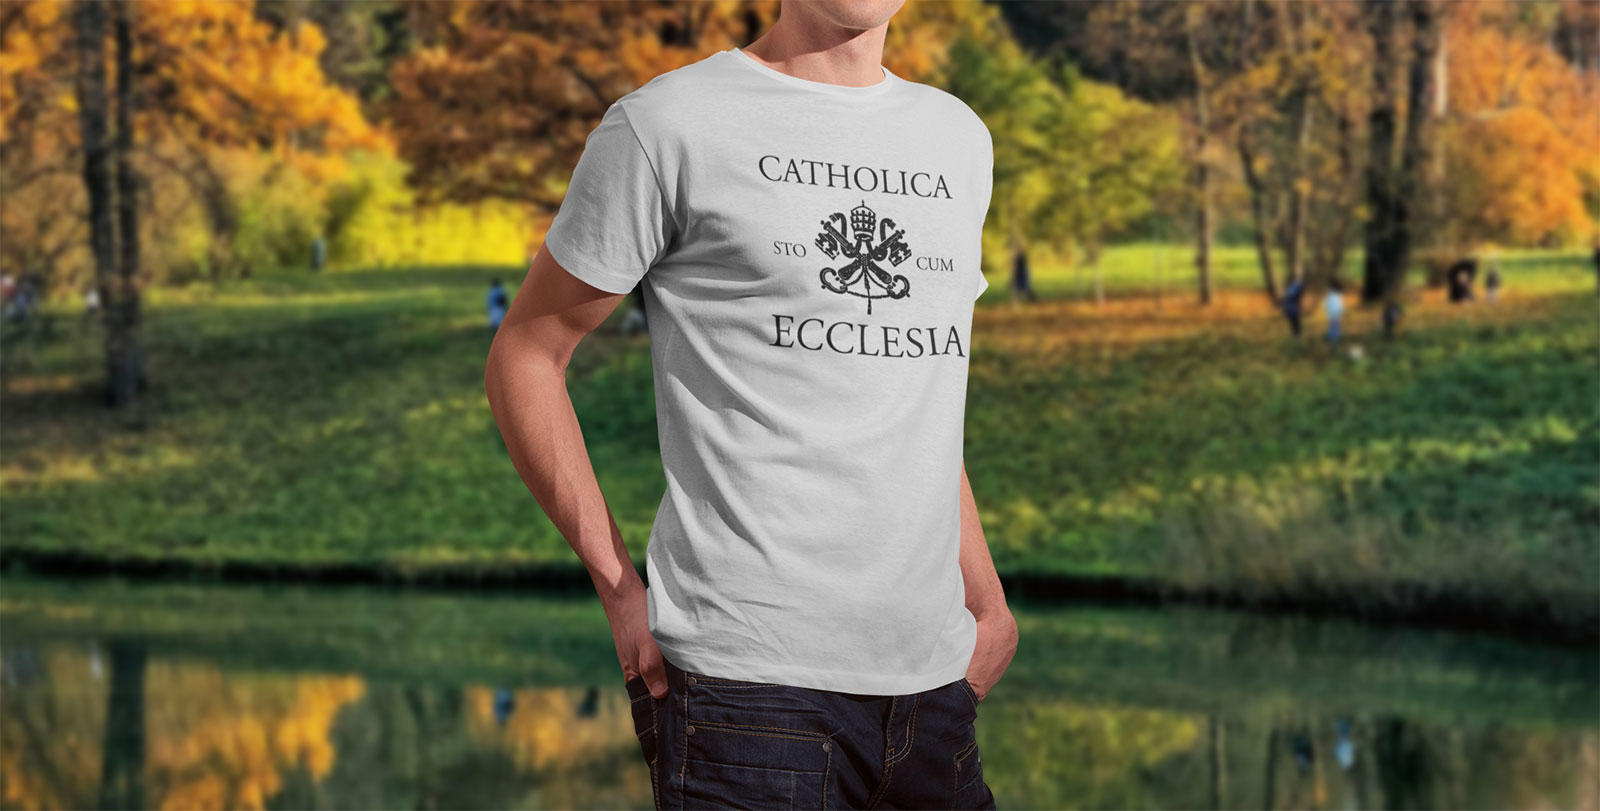 Man wearing a Solemnitees t-shirt and standing in front of lake.